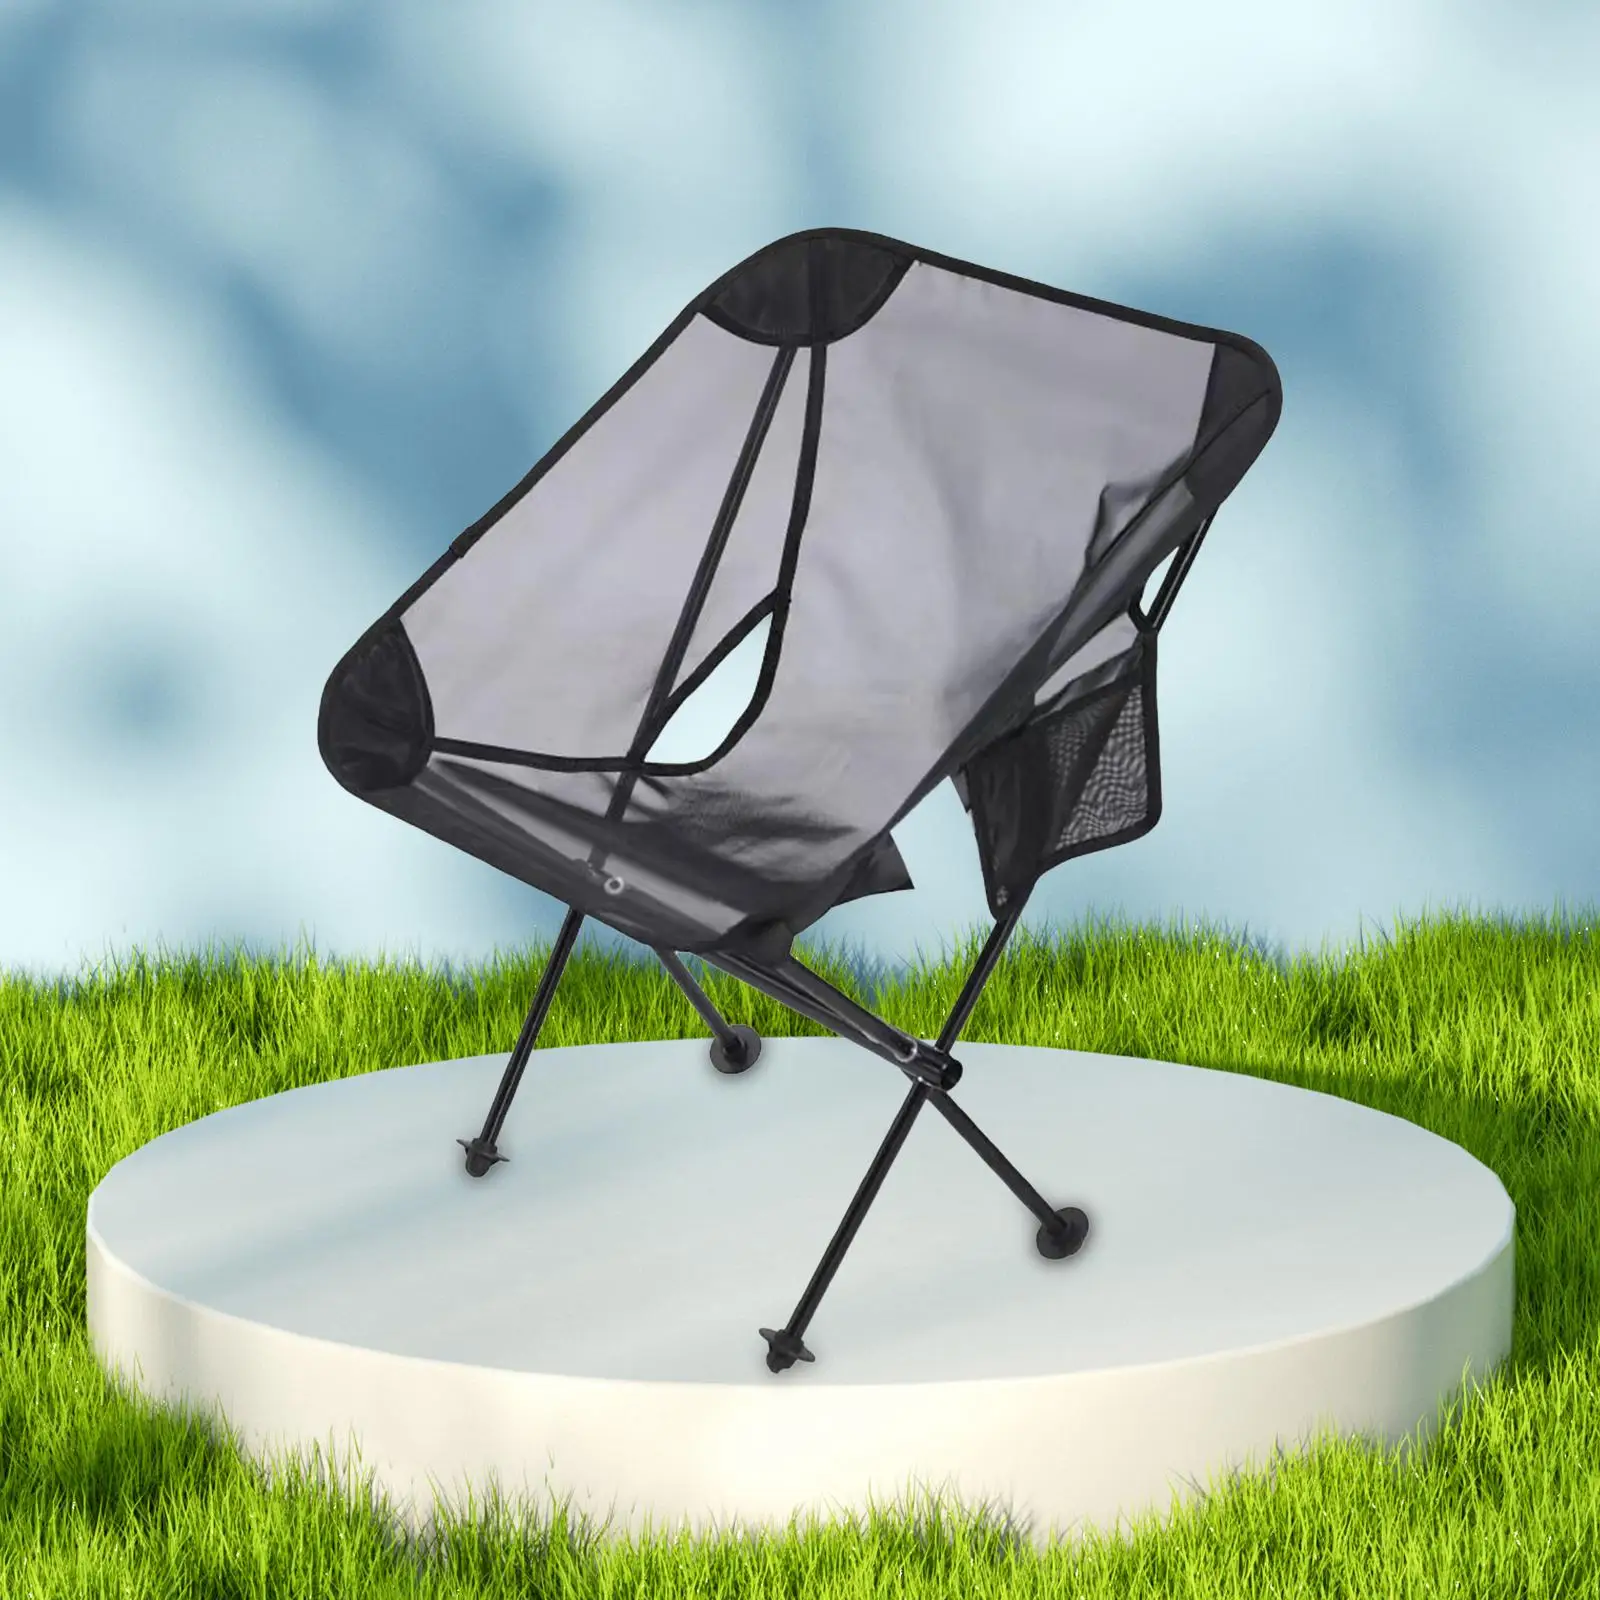 Folding Camping Chair for Outdoor Portable Parks Garden Travels Hiking Practical Backyard Campings Accessory Outdoor Moon Chair